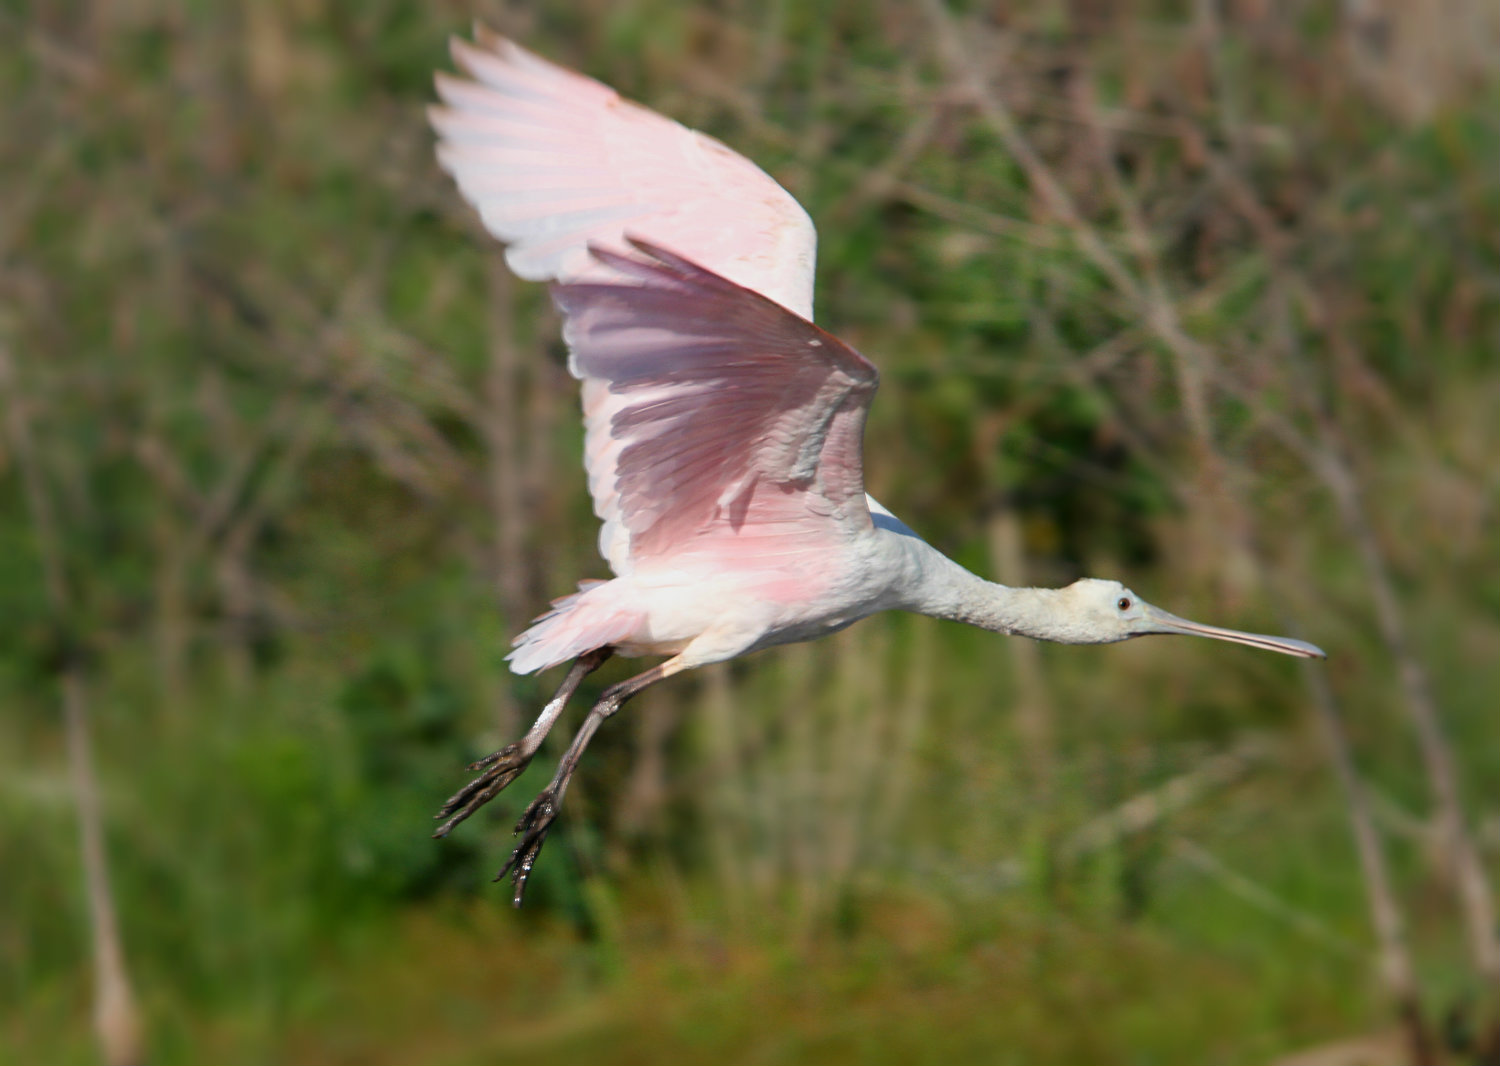 Young Spoonbill